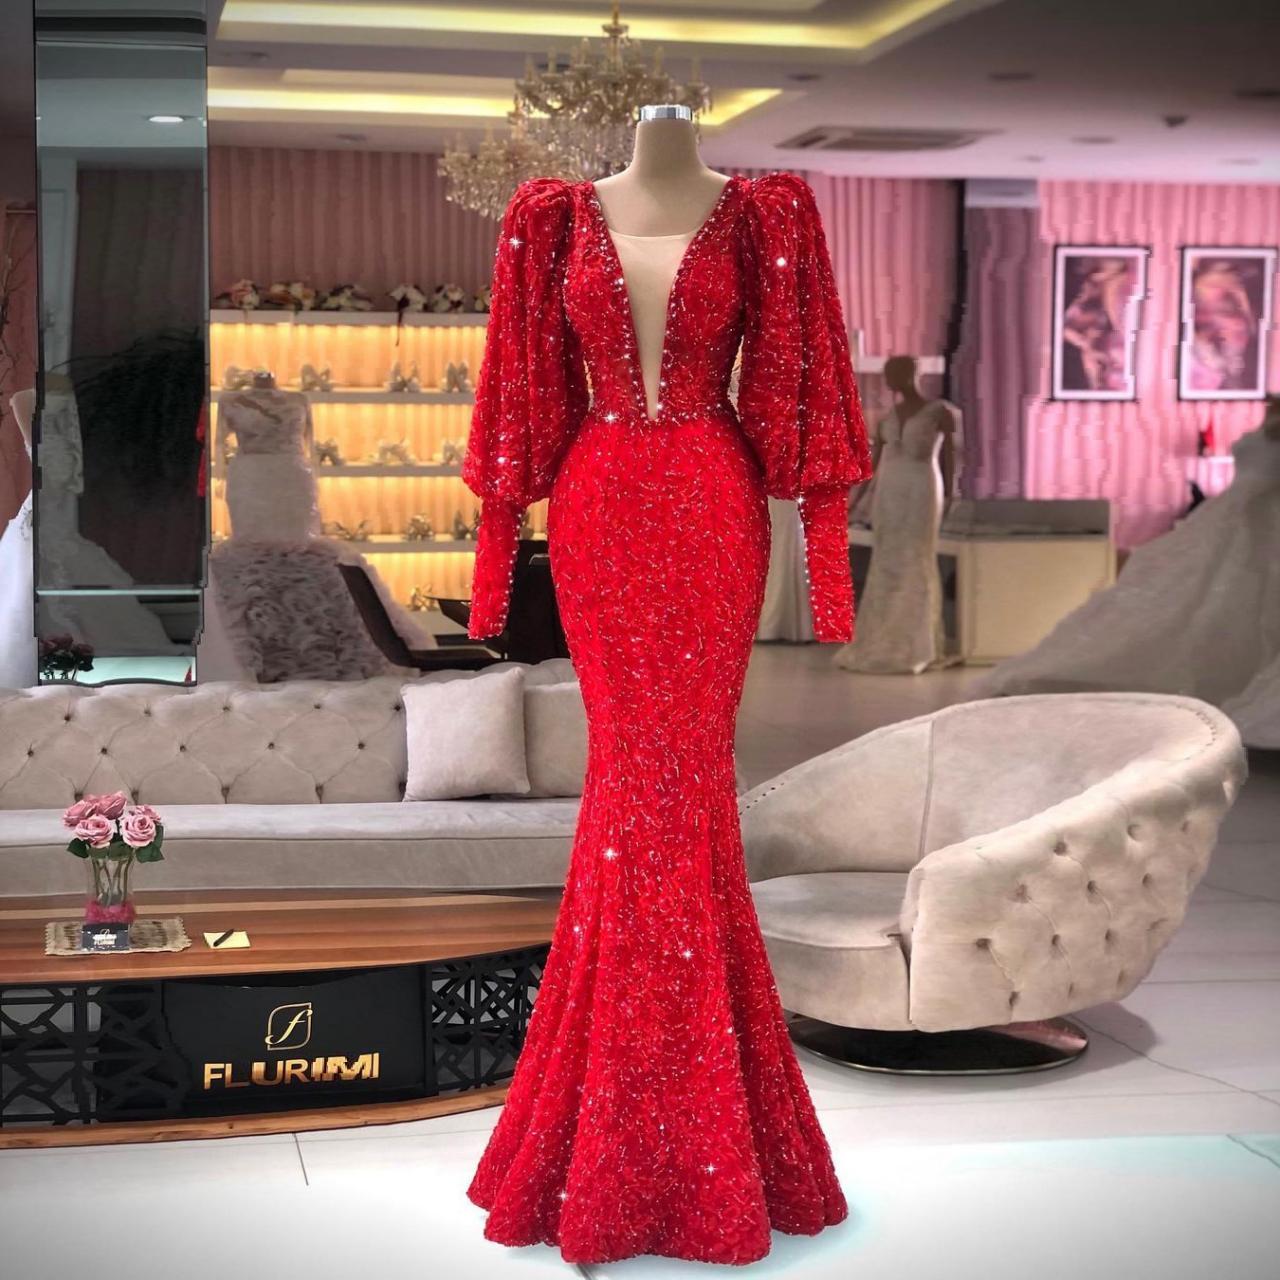 Red Prom Dresses, Lace Prom Dresses, Sequins Prom Dresses, Mermaid Prom Dresses, 2022 Prom Dresses, Custom Make Prom Dresses, Sexy Evening